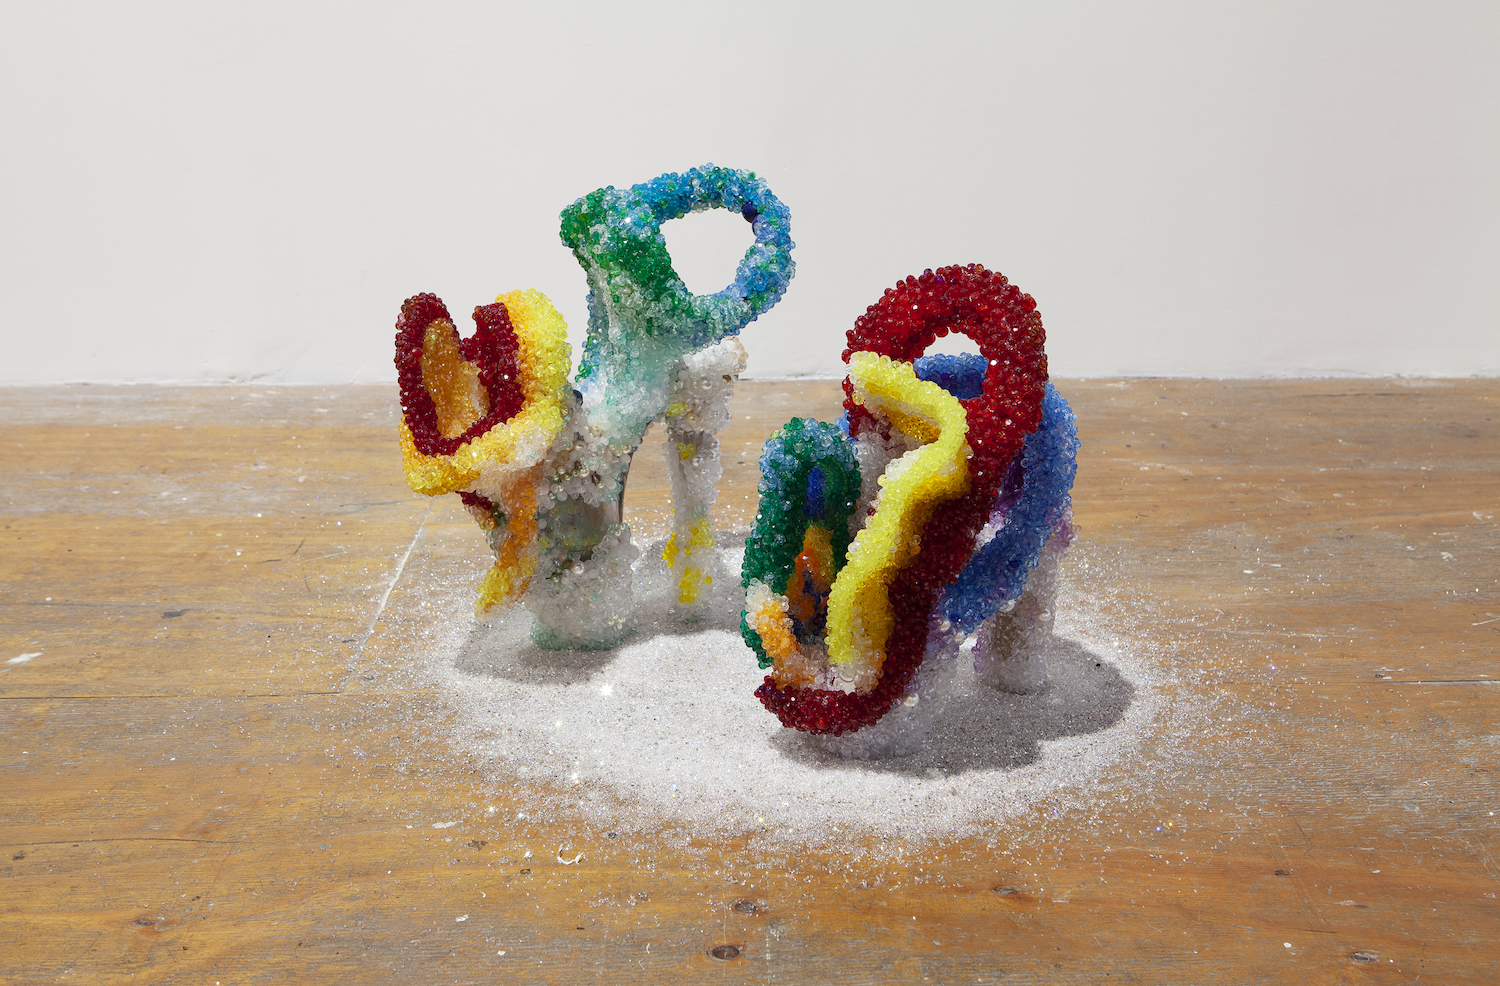 Raúl de Nieves, *who would we be with out our memories*, 2019. Beads, glue, and artist’s shoe